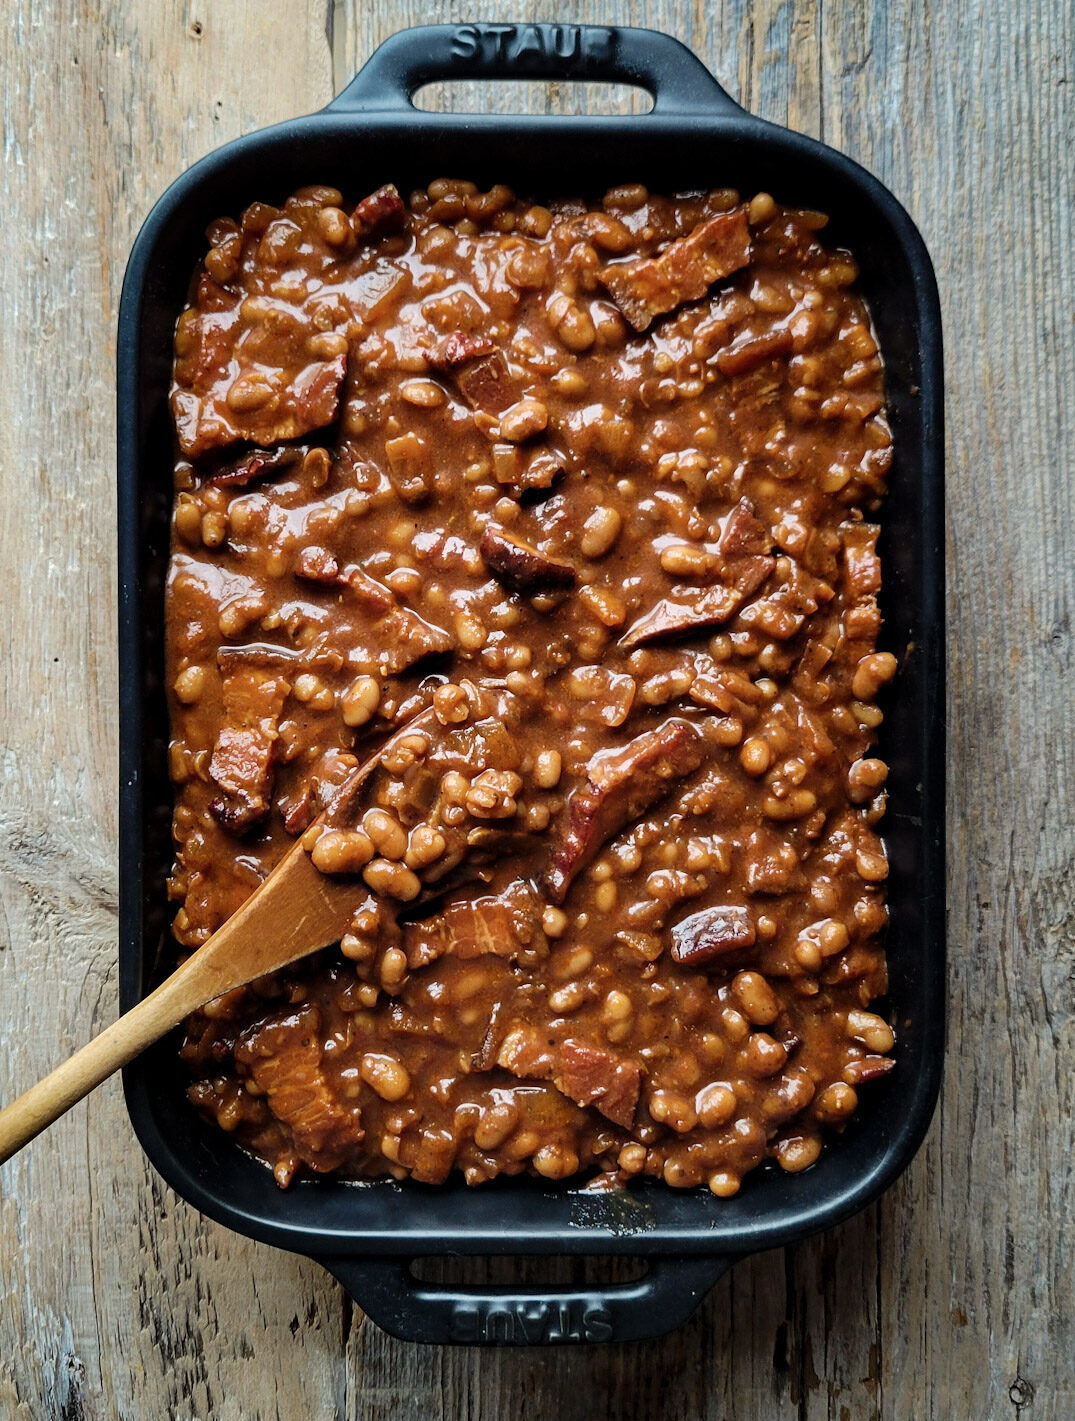 A casserole baking dish filled with Classic Baked Beans on a wood surface, with a wooden spoon is to the side.